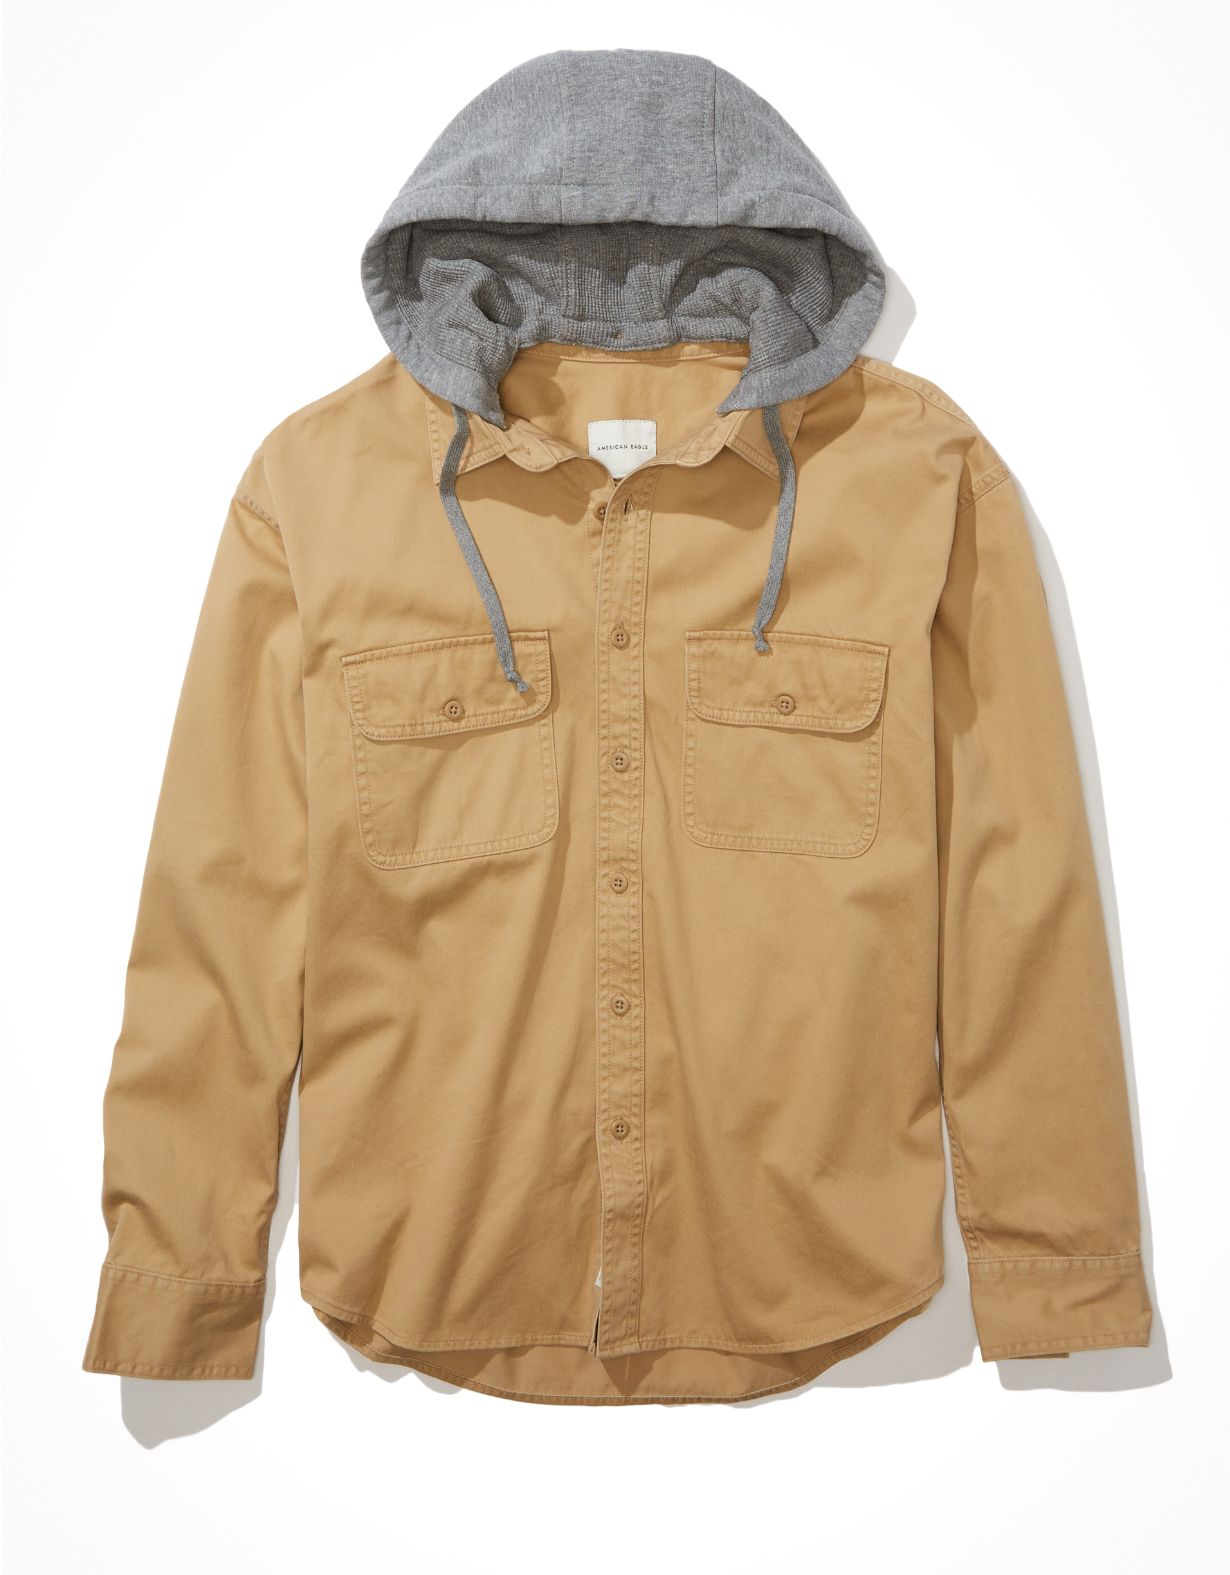 AE Super Soft Hooded Button-Up Shirt